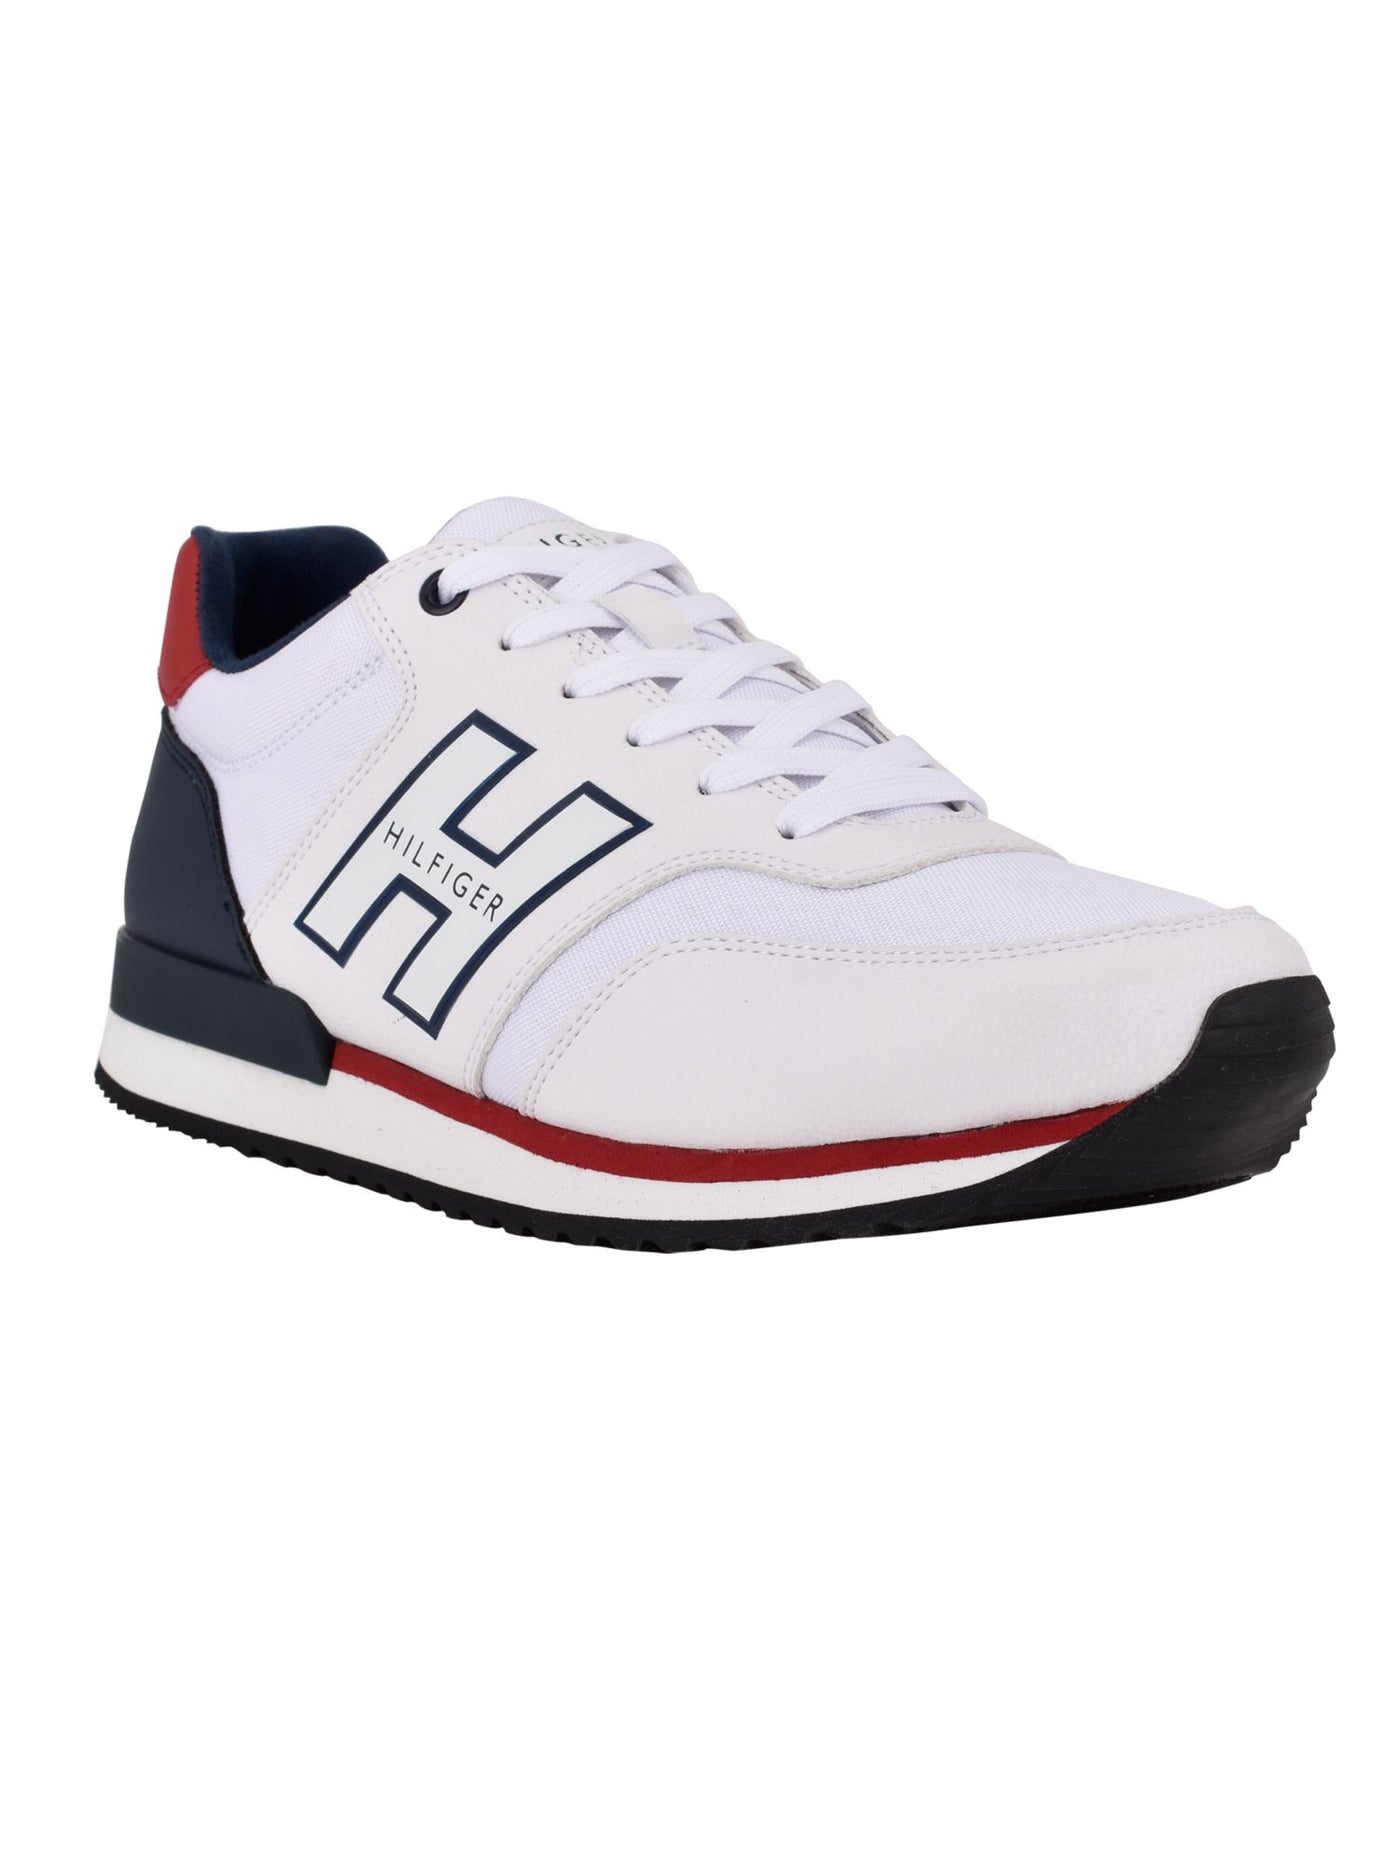 TOMMY HILFIGER Mens White Color Block Cushioned Mainer Round Toe Lace-Up Sneakers Shoes 8.5 M